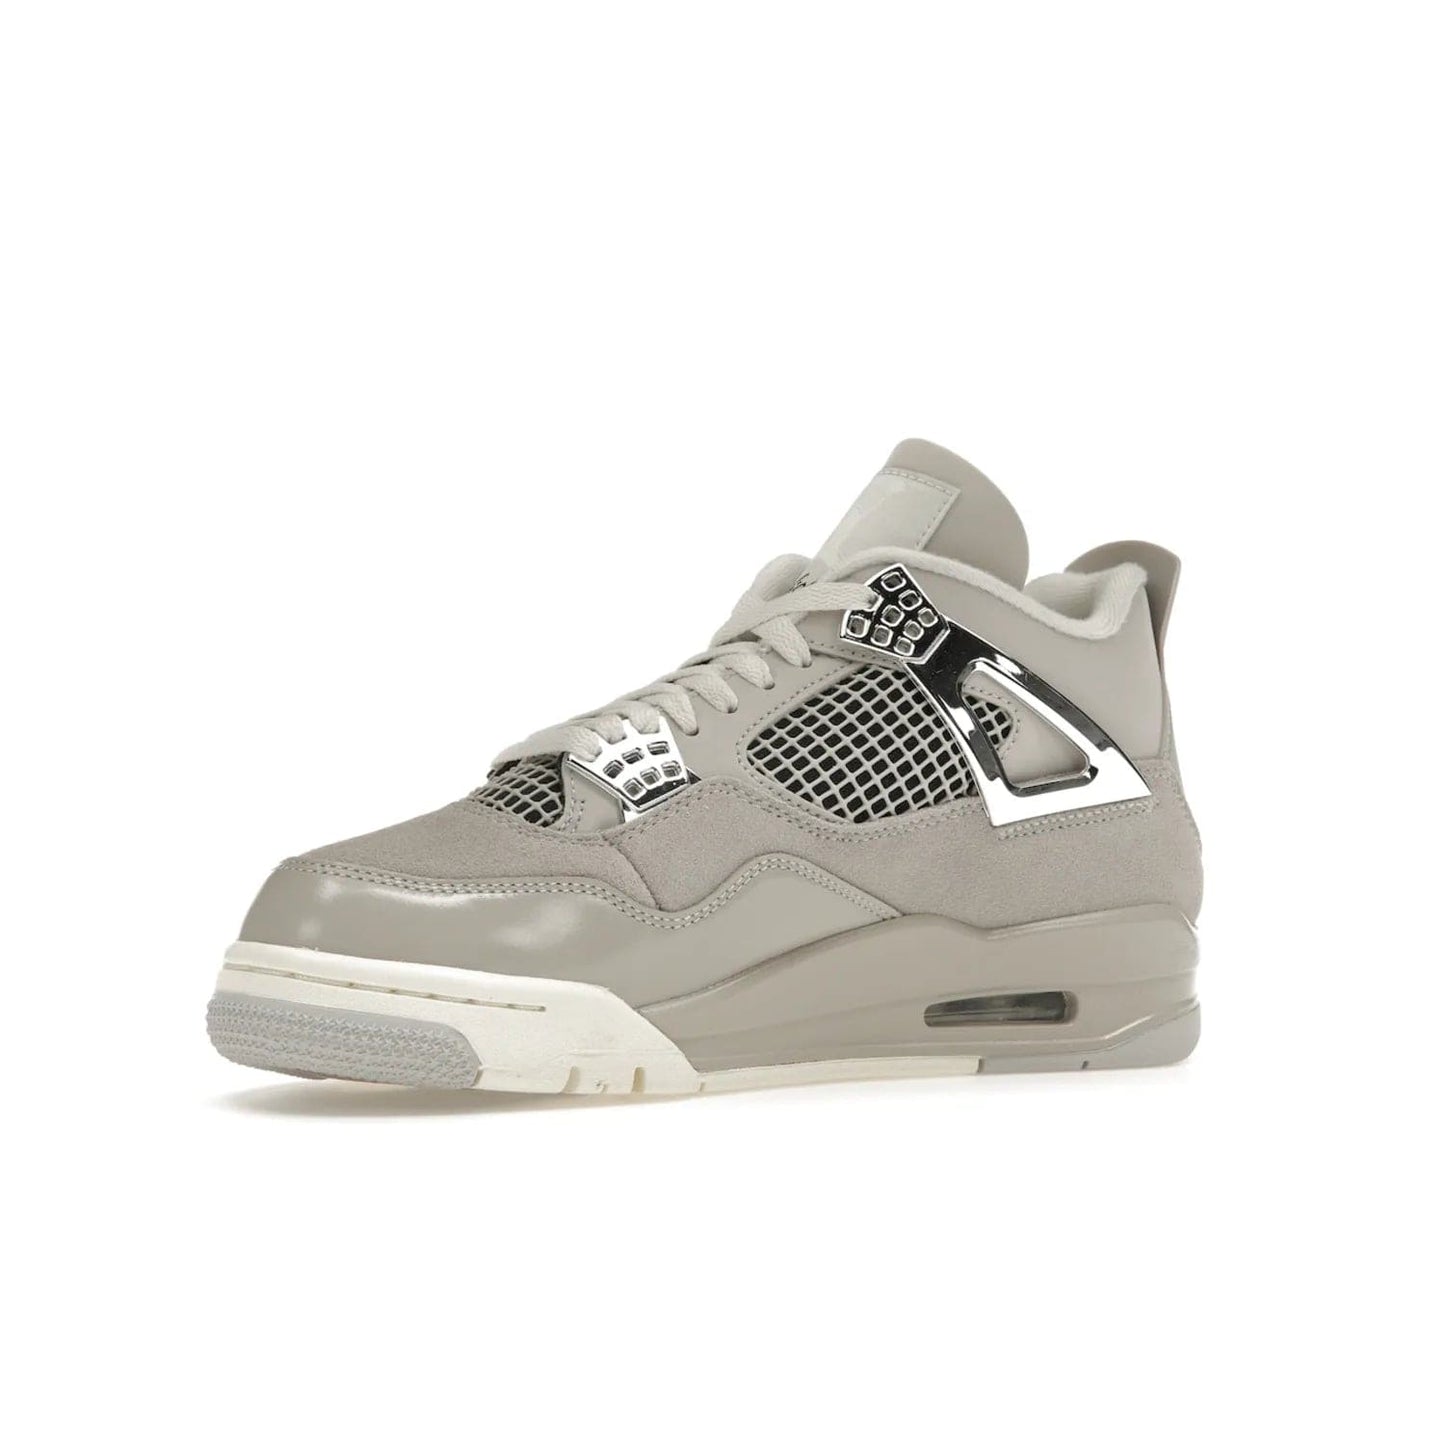 Jordan 4 Retro Frozen Moments (Women's) - Image 16 - Only at www.BallersClubKickz.com - The Jordan 4 Retro Frozen Moments is a stylish blend of classic design elements and modern tones. Featuring suede and leather overlays in a light iron-ore, sail, neutral grey, black, and metallic silver colorway. Get this iconic high-performance sneaker for $210.